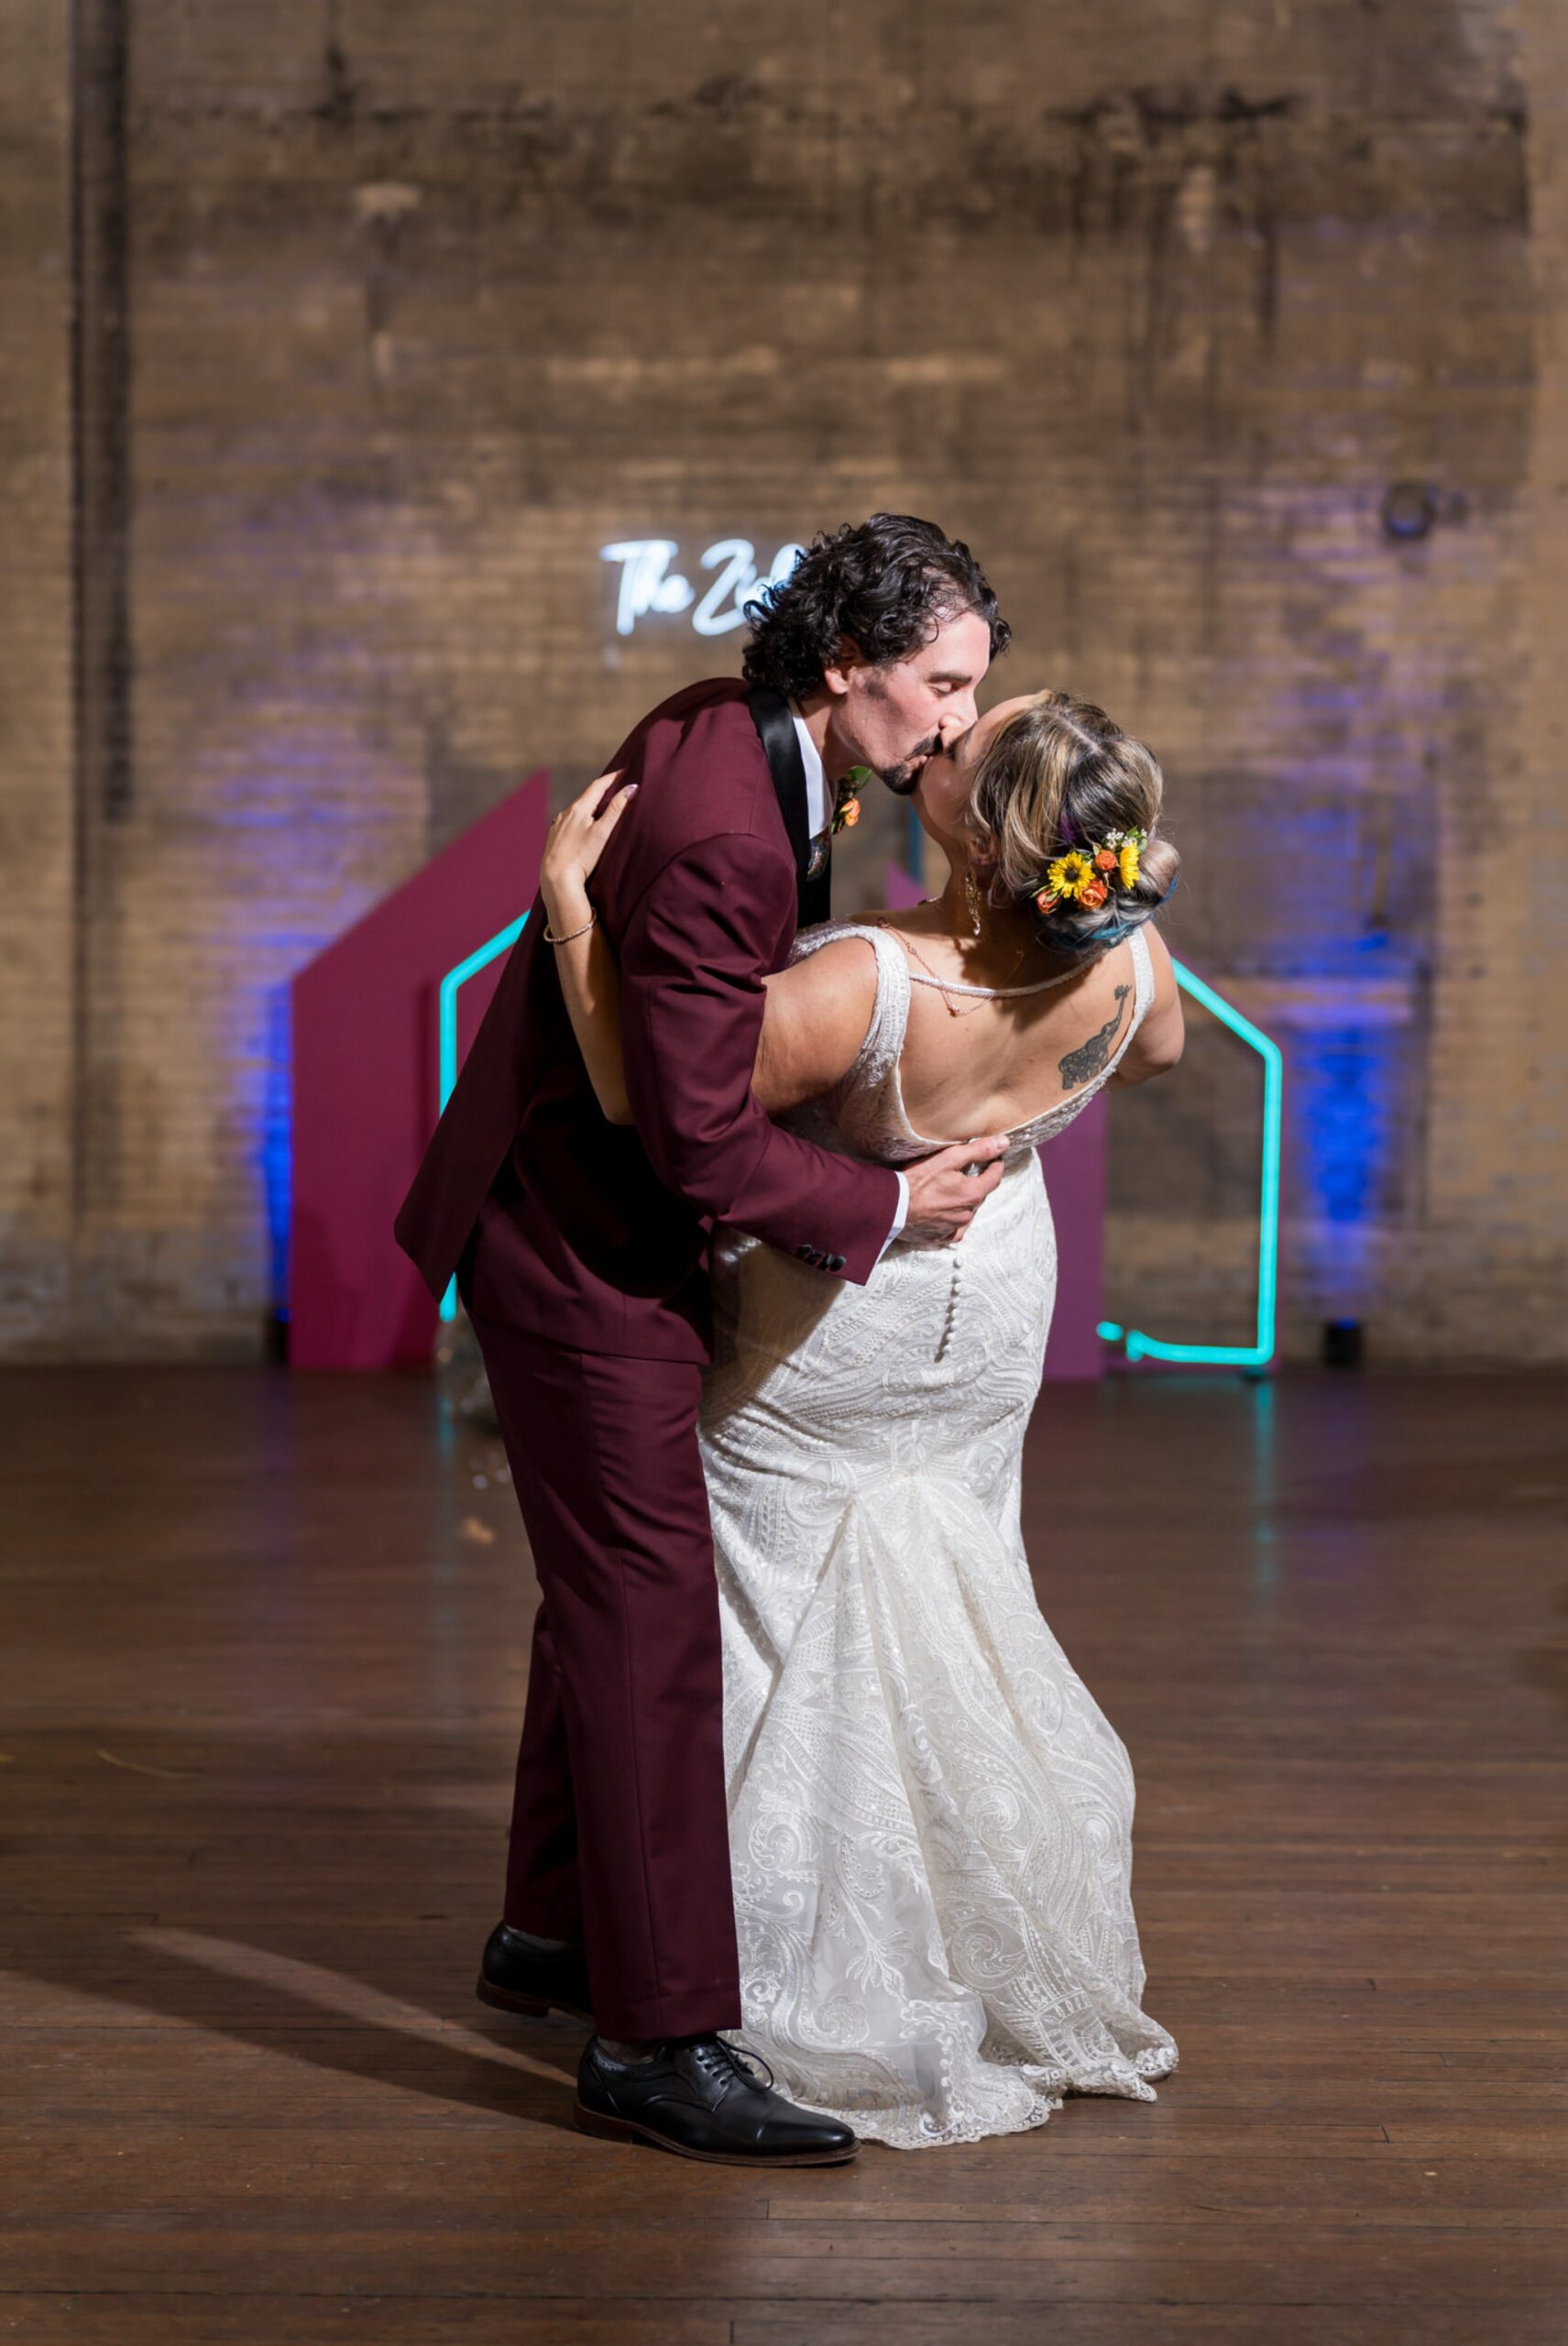 A bride and groom kiss during their first dance at their Jam Handy wedding.  